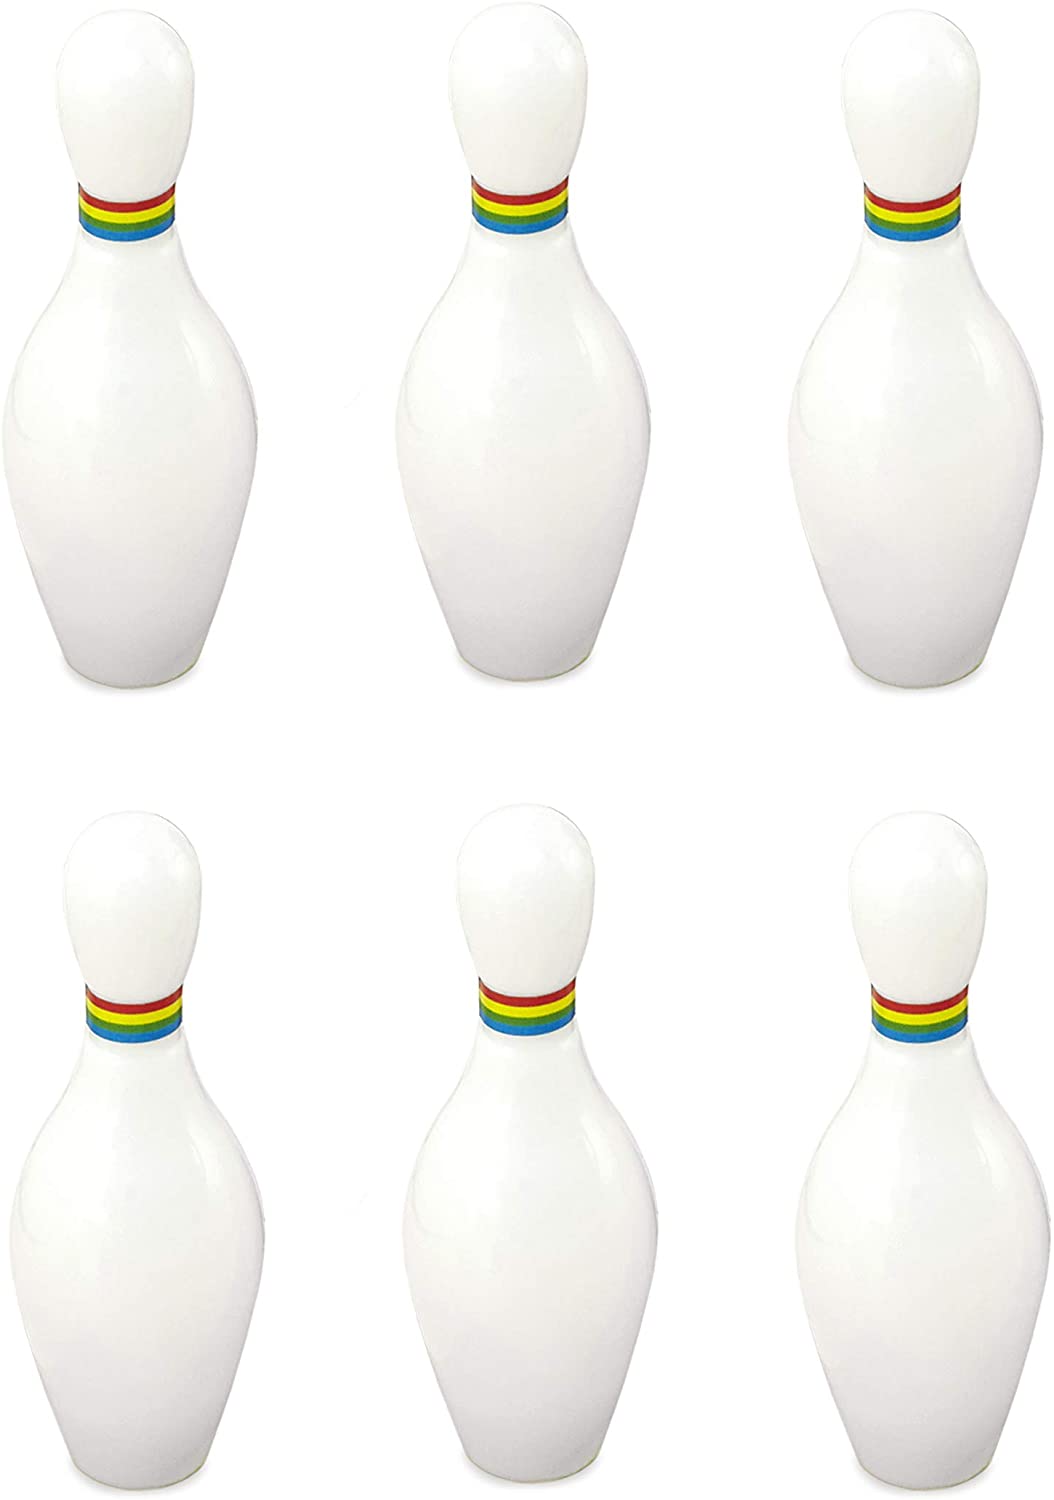 six tabletop bowling pins displayed on a white background